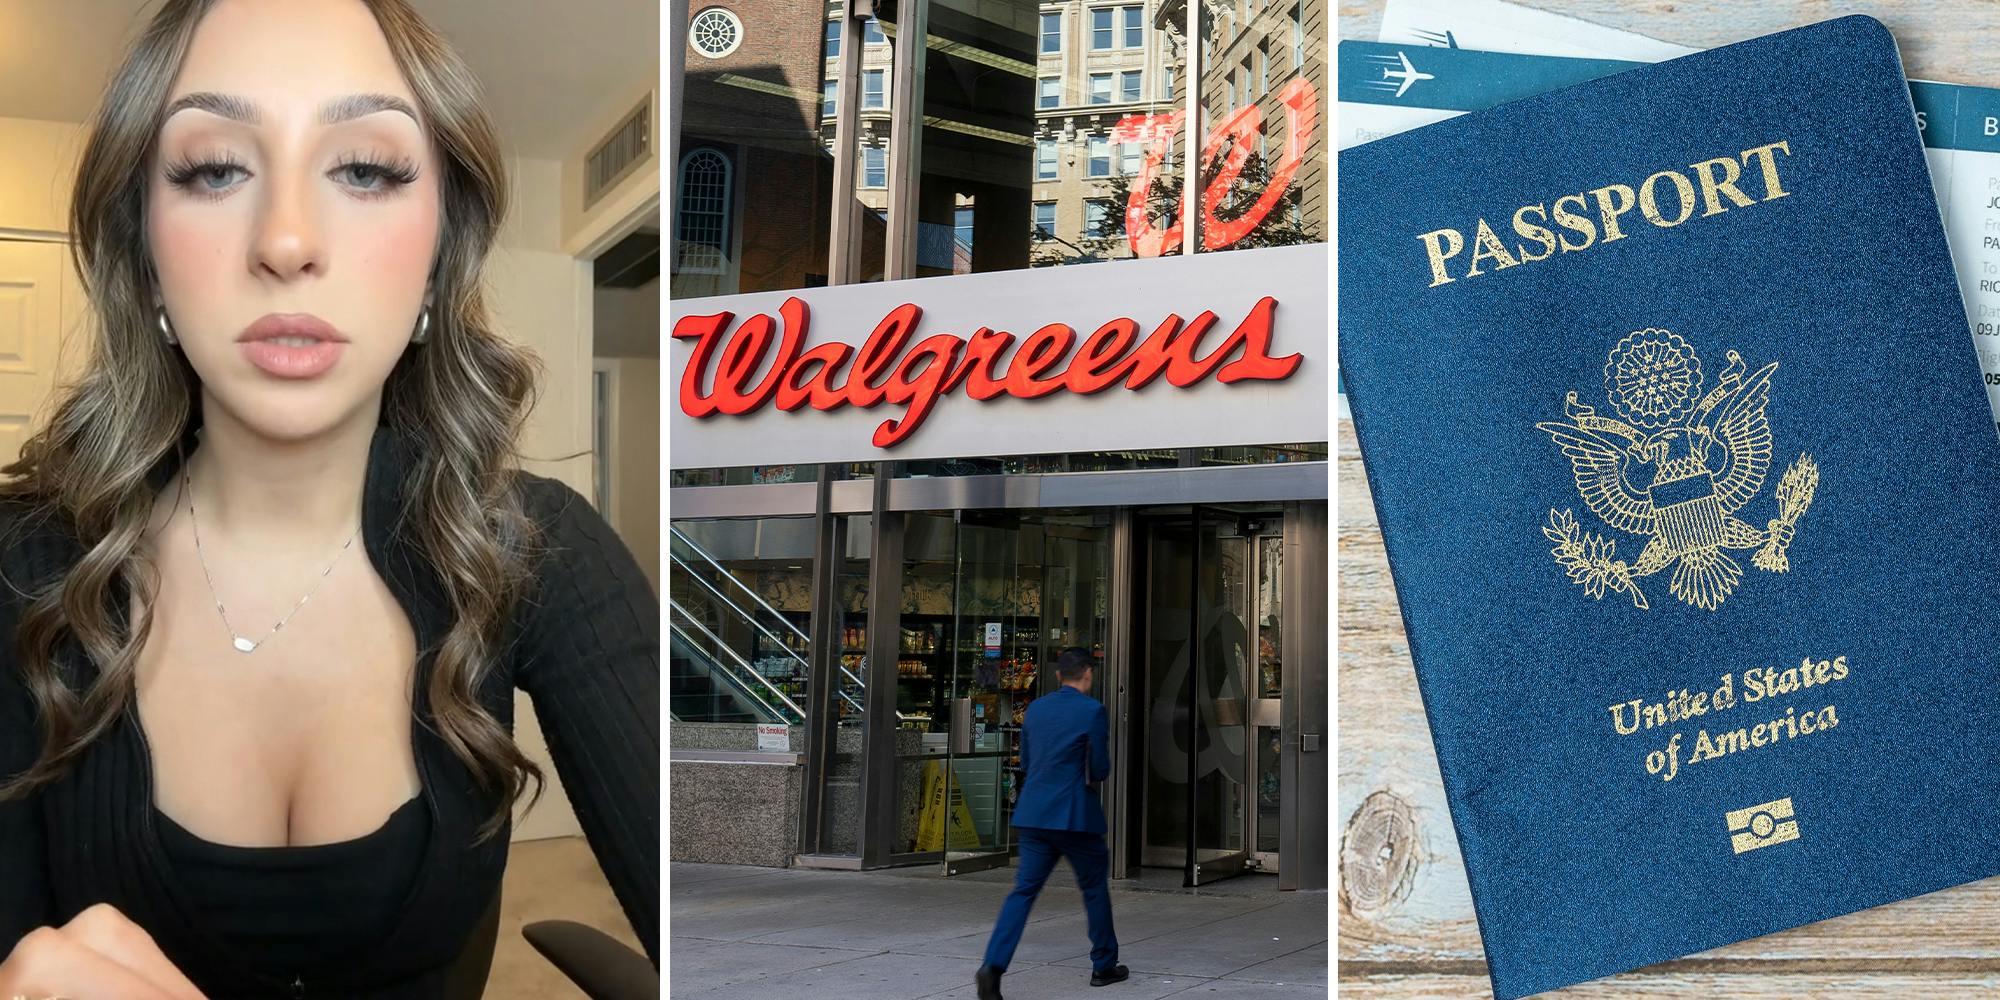 Woman says you should never get passport photo taken at Walgreens, reveals where to get it taken instead